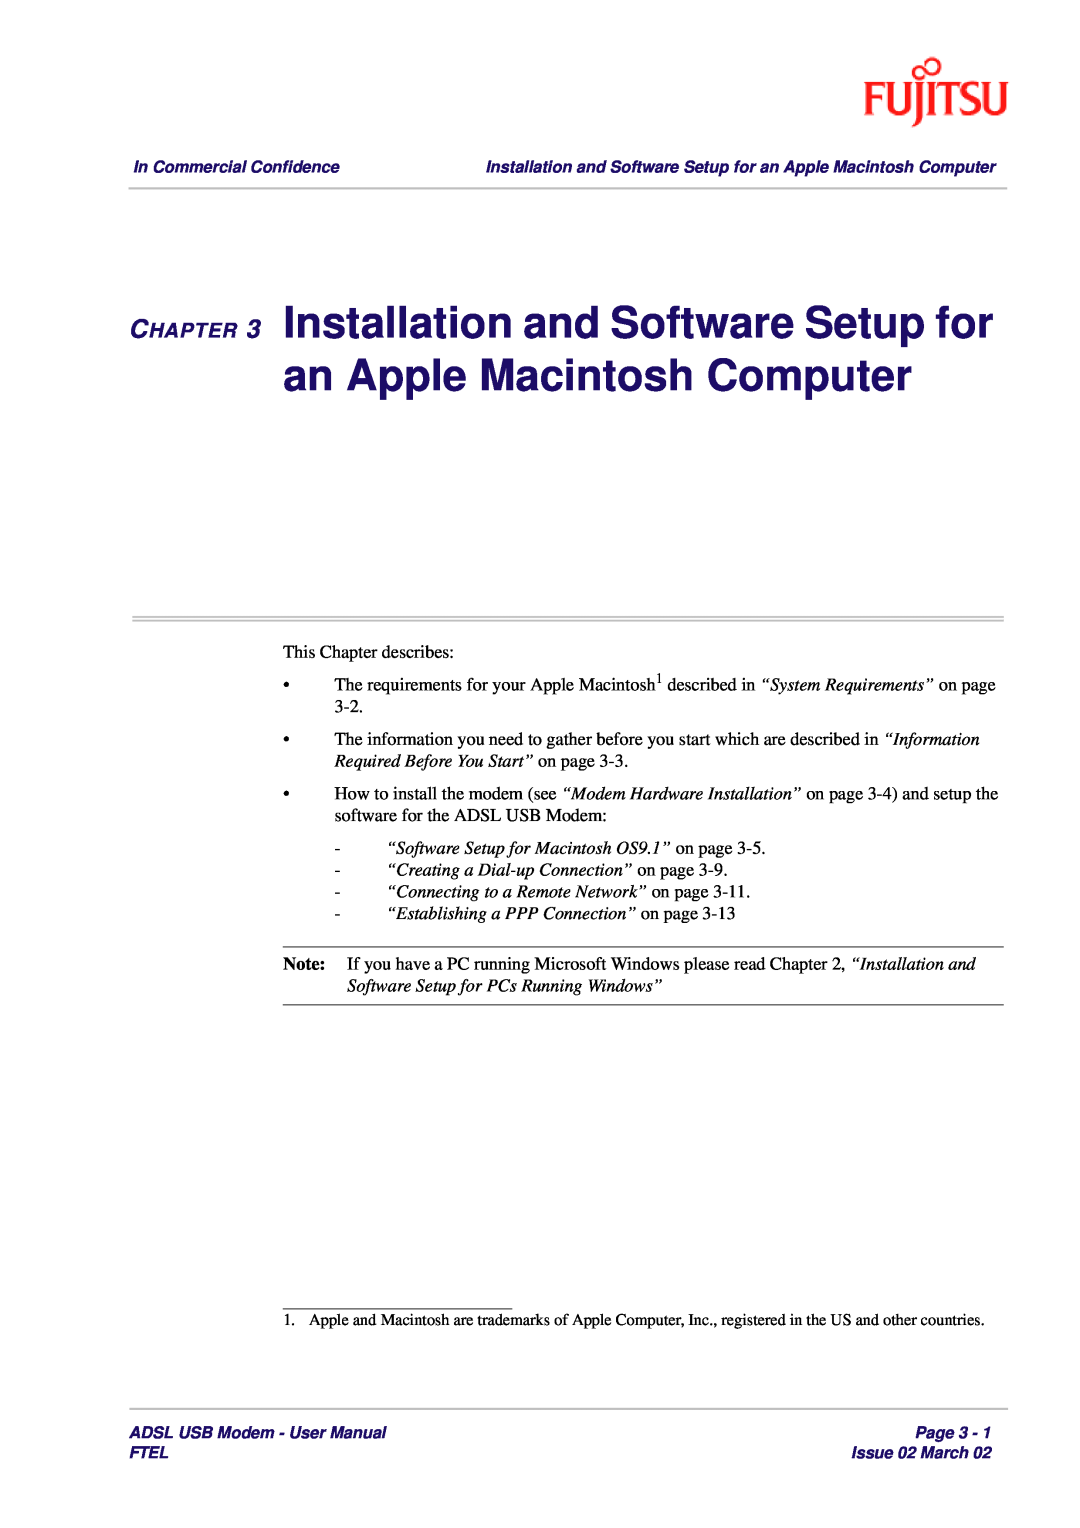 Fujitsu 3XAX-00803AAS user manual “Software Setup for Macintosh OS9.1” on page, “Creating a Dial-up Connection” on page 